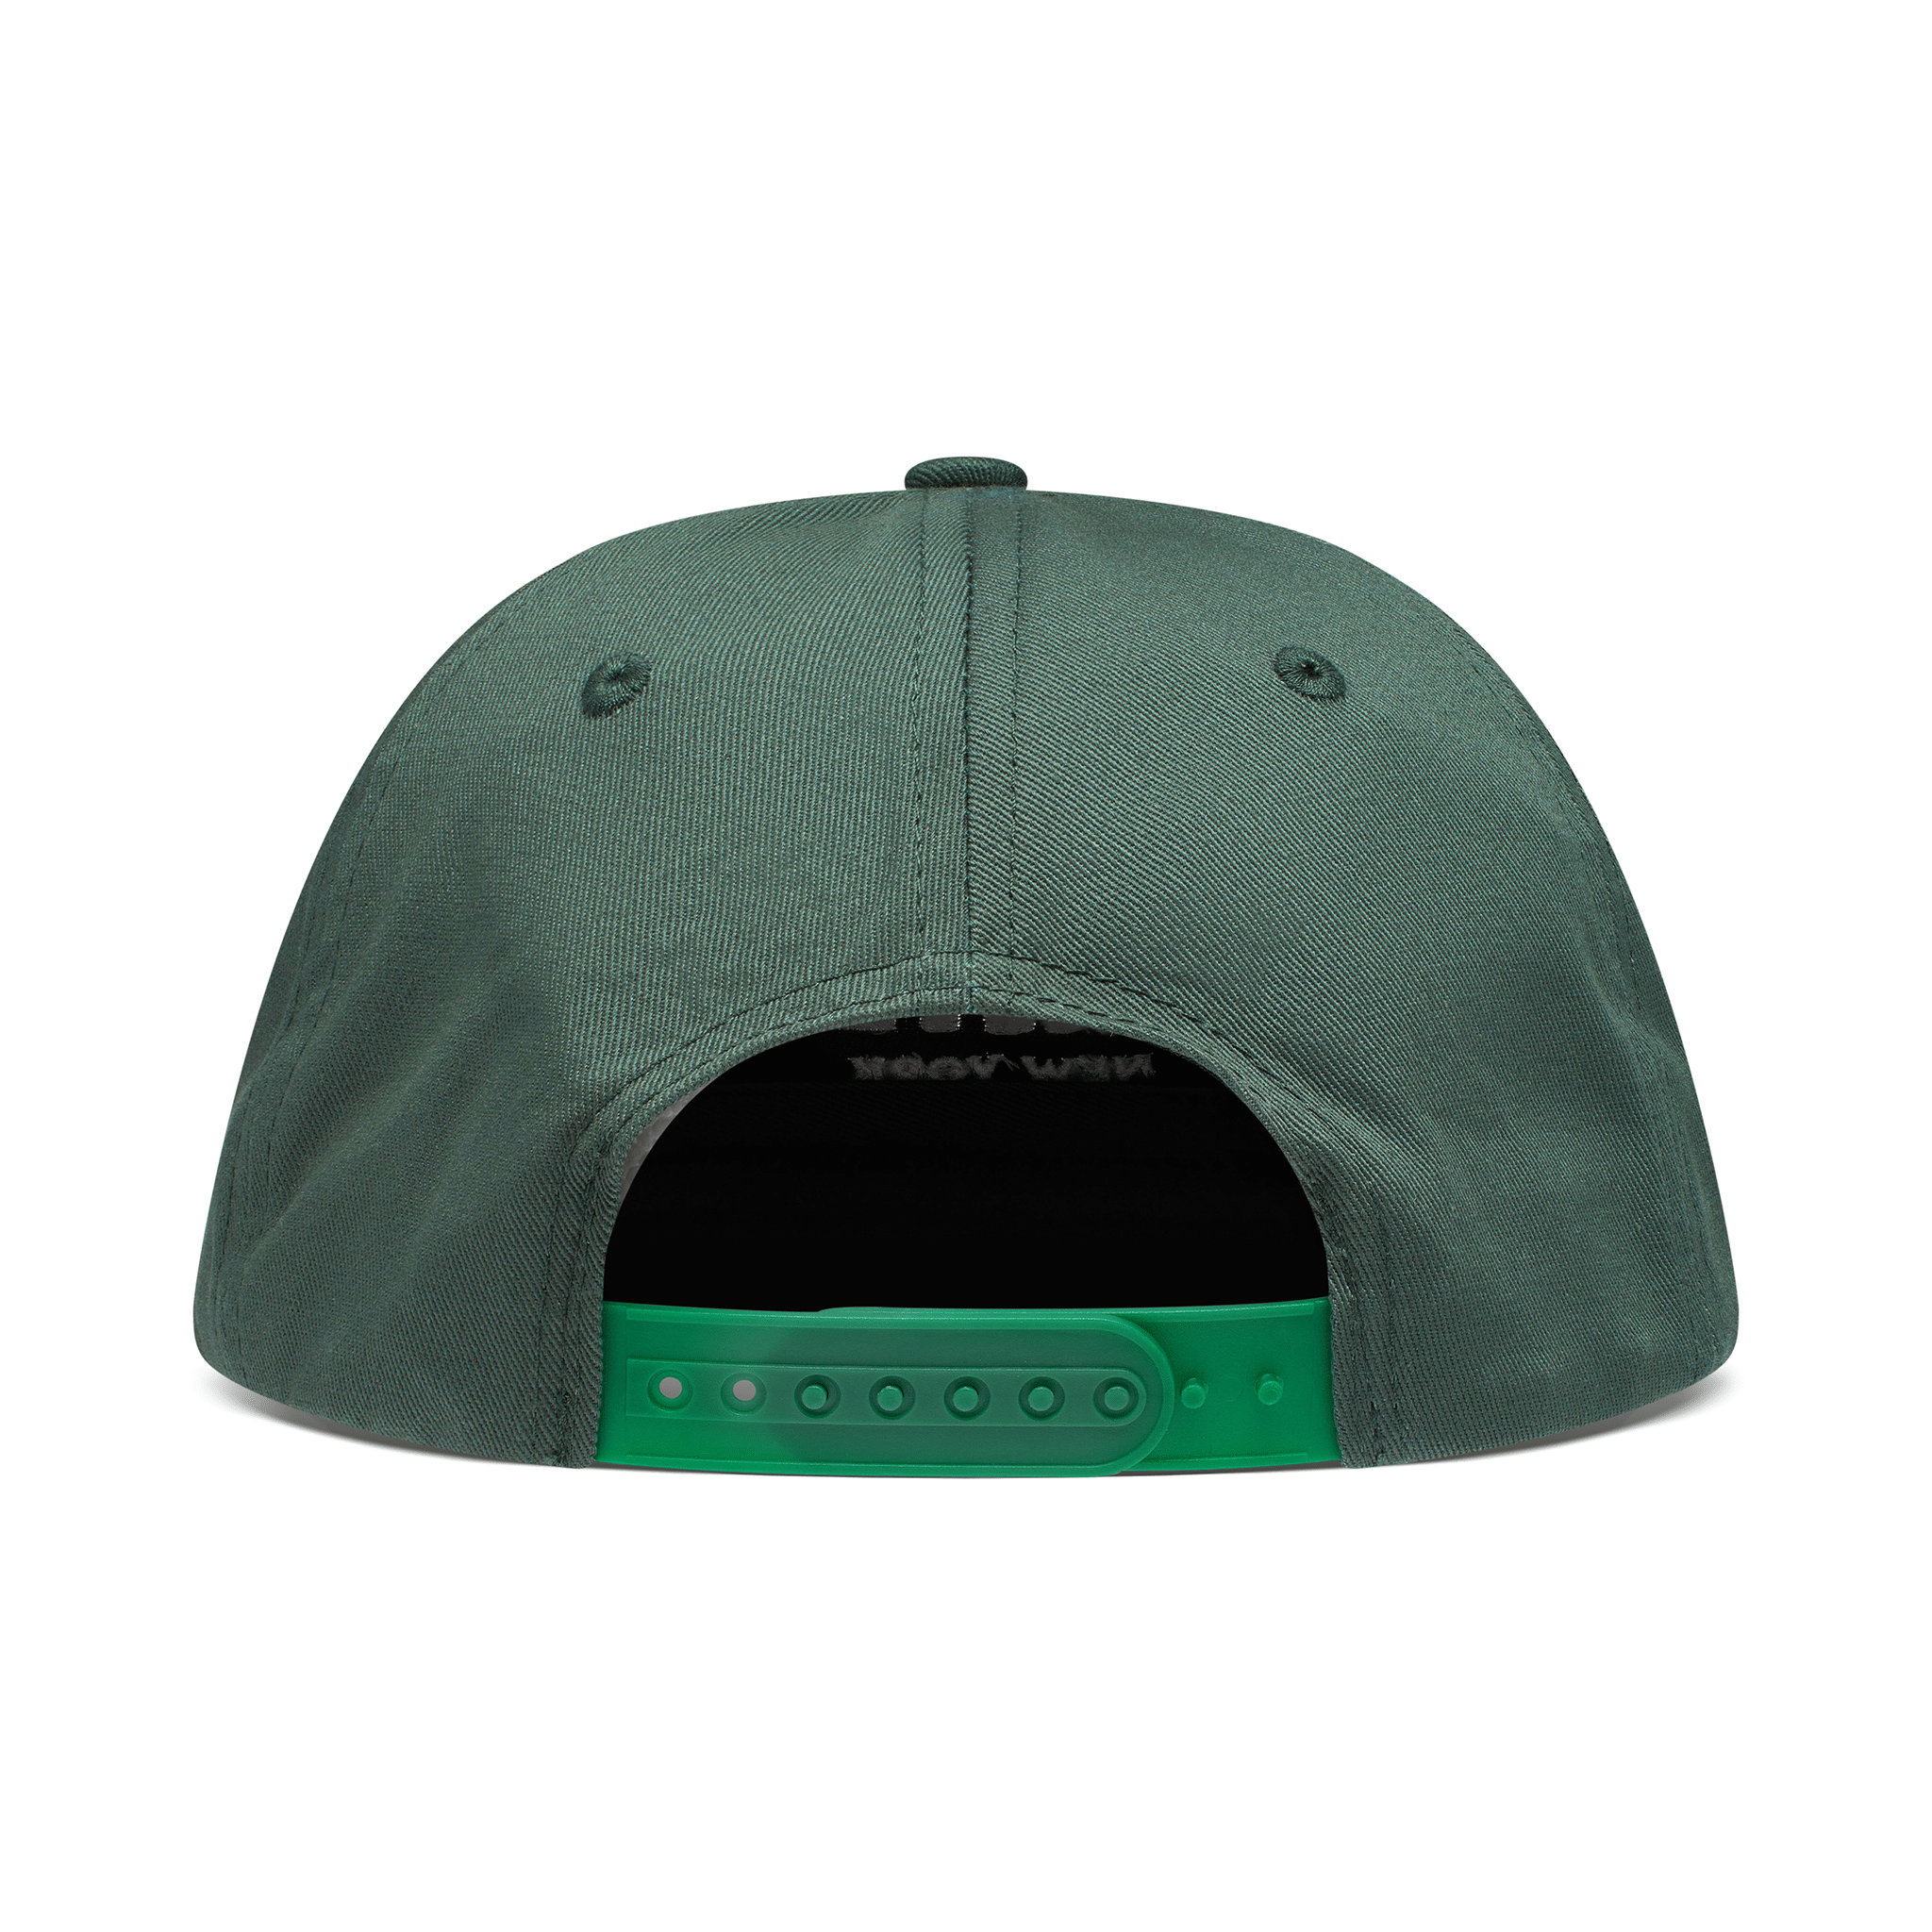 Unstructured Badge Hat - Minted New York